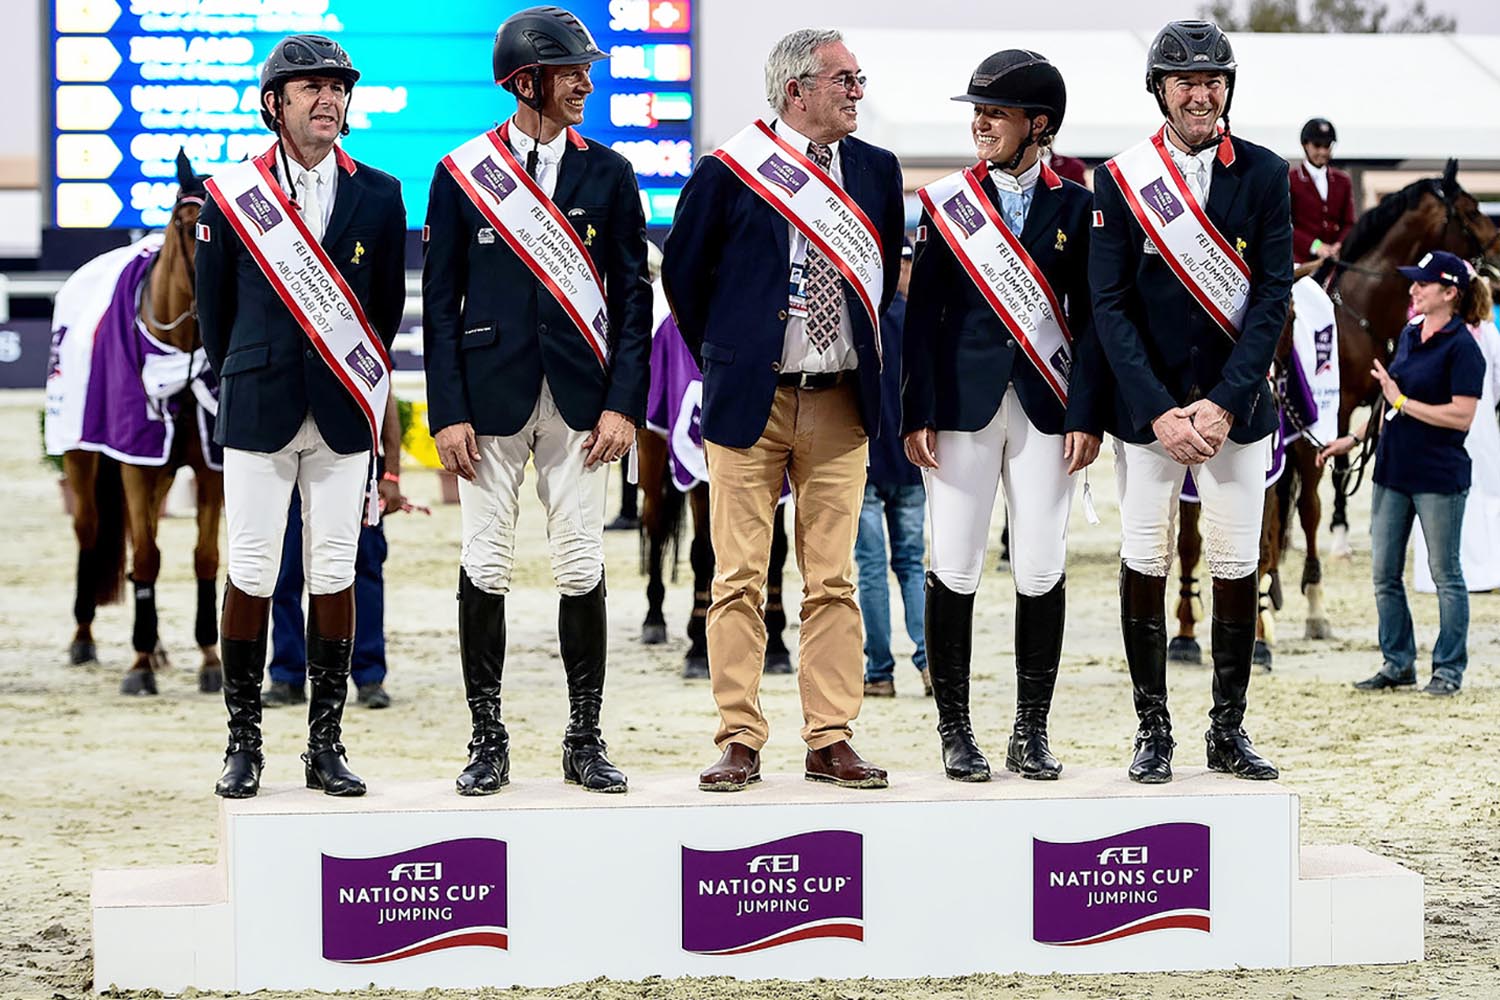 FEI Nations Cup